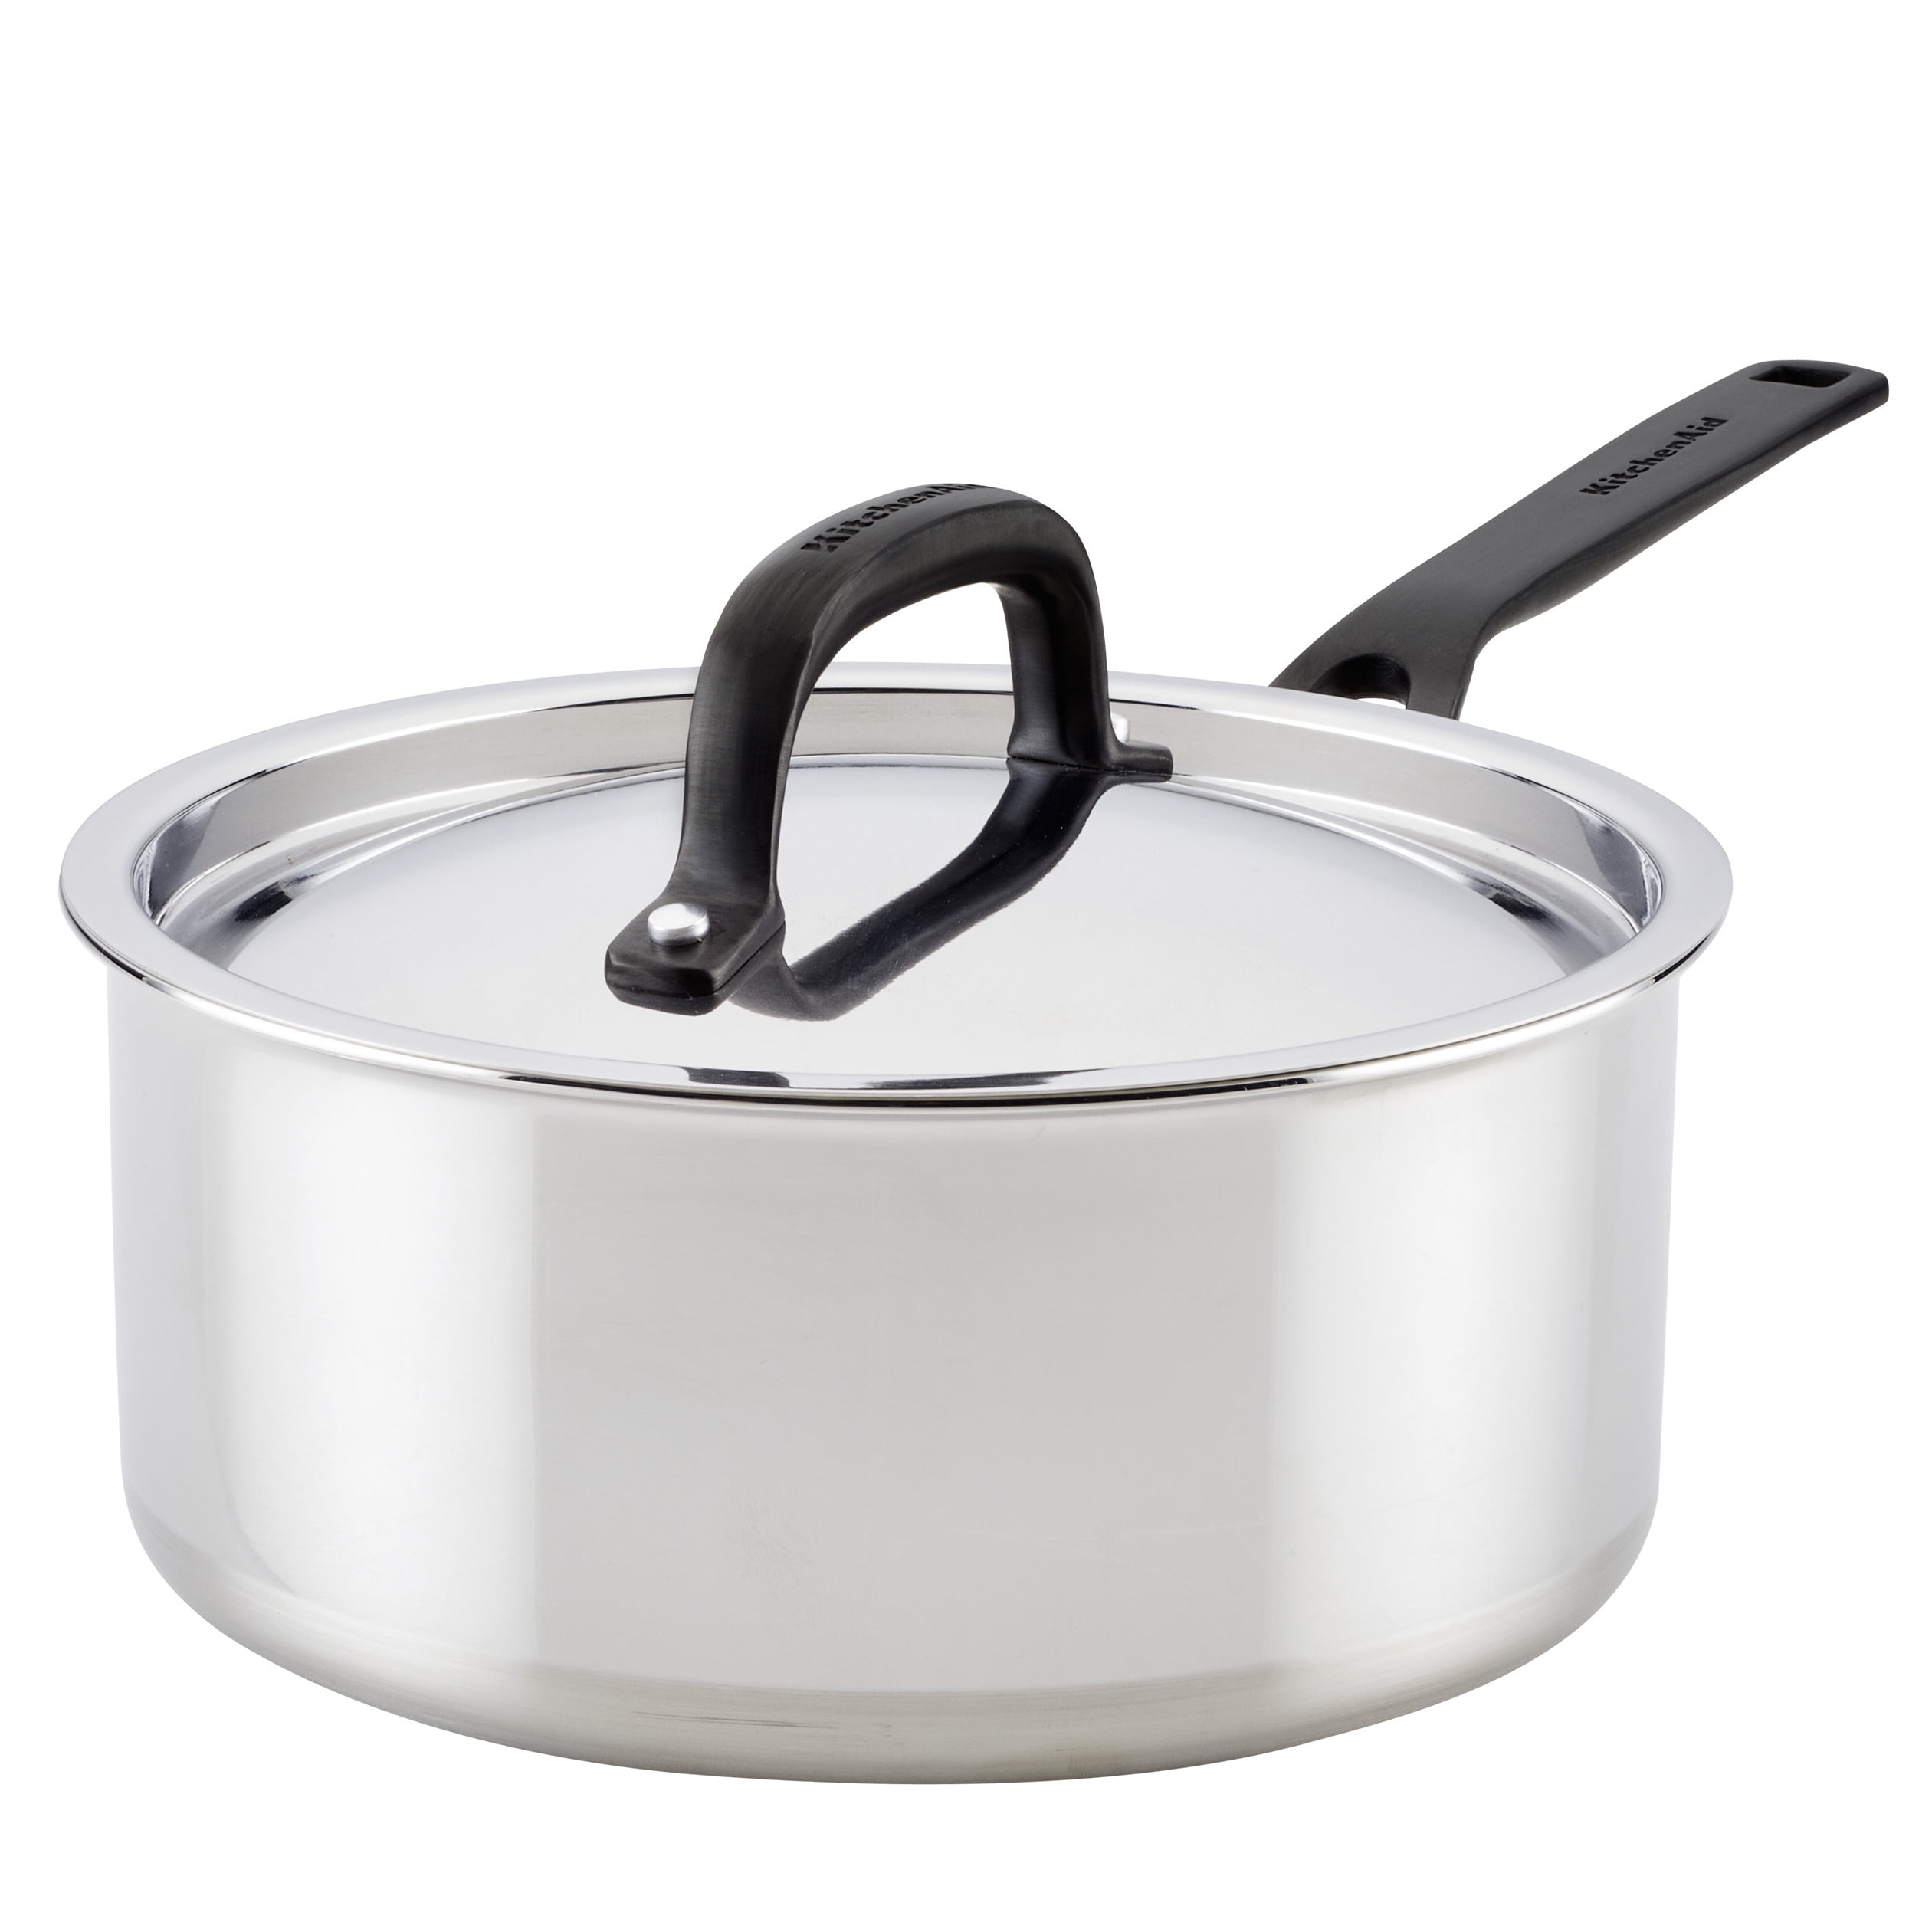 D5 Stainless Polished 5-ply 1.5 Quart Saucepan